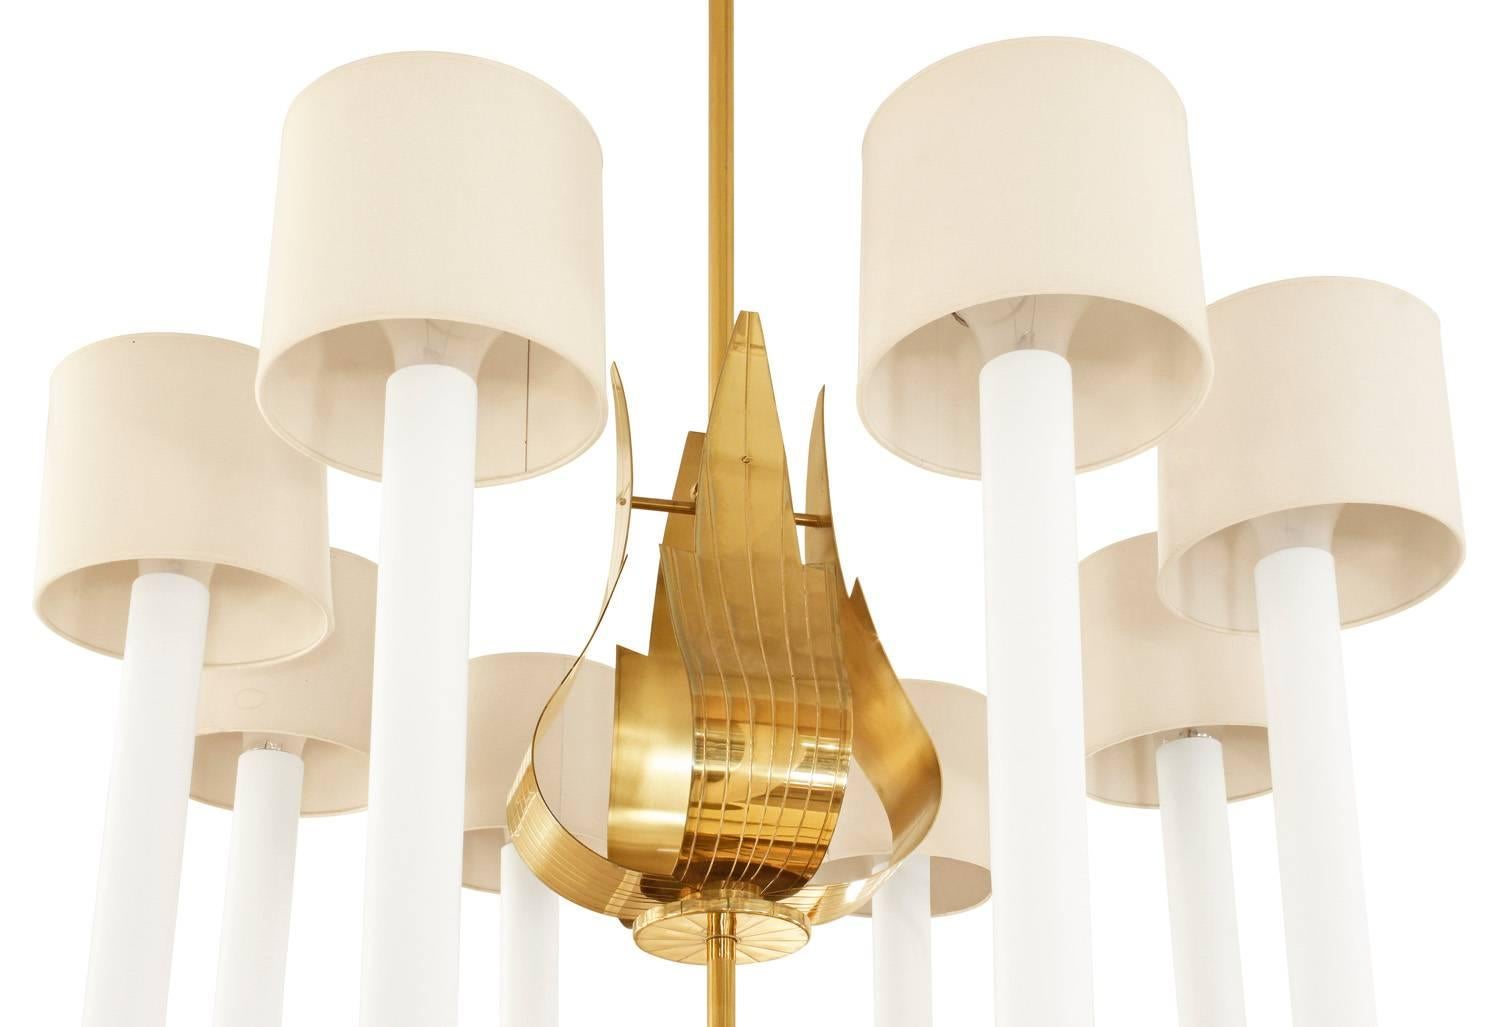 Large eight-arm chandelier in brass with curved leaf motif and down light by Tommi Parzinger for Parzinger Originals, American 1960s. This is an iconic and exceptional Parzinger design.